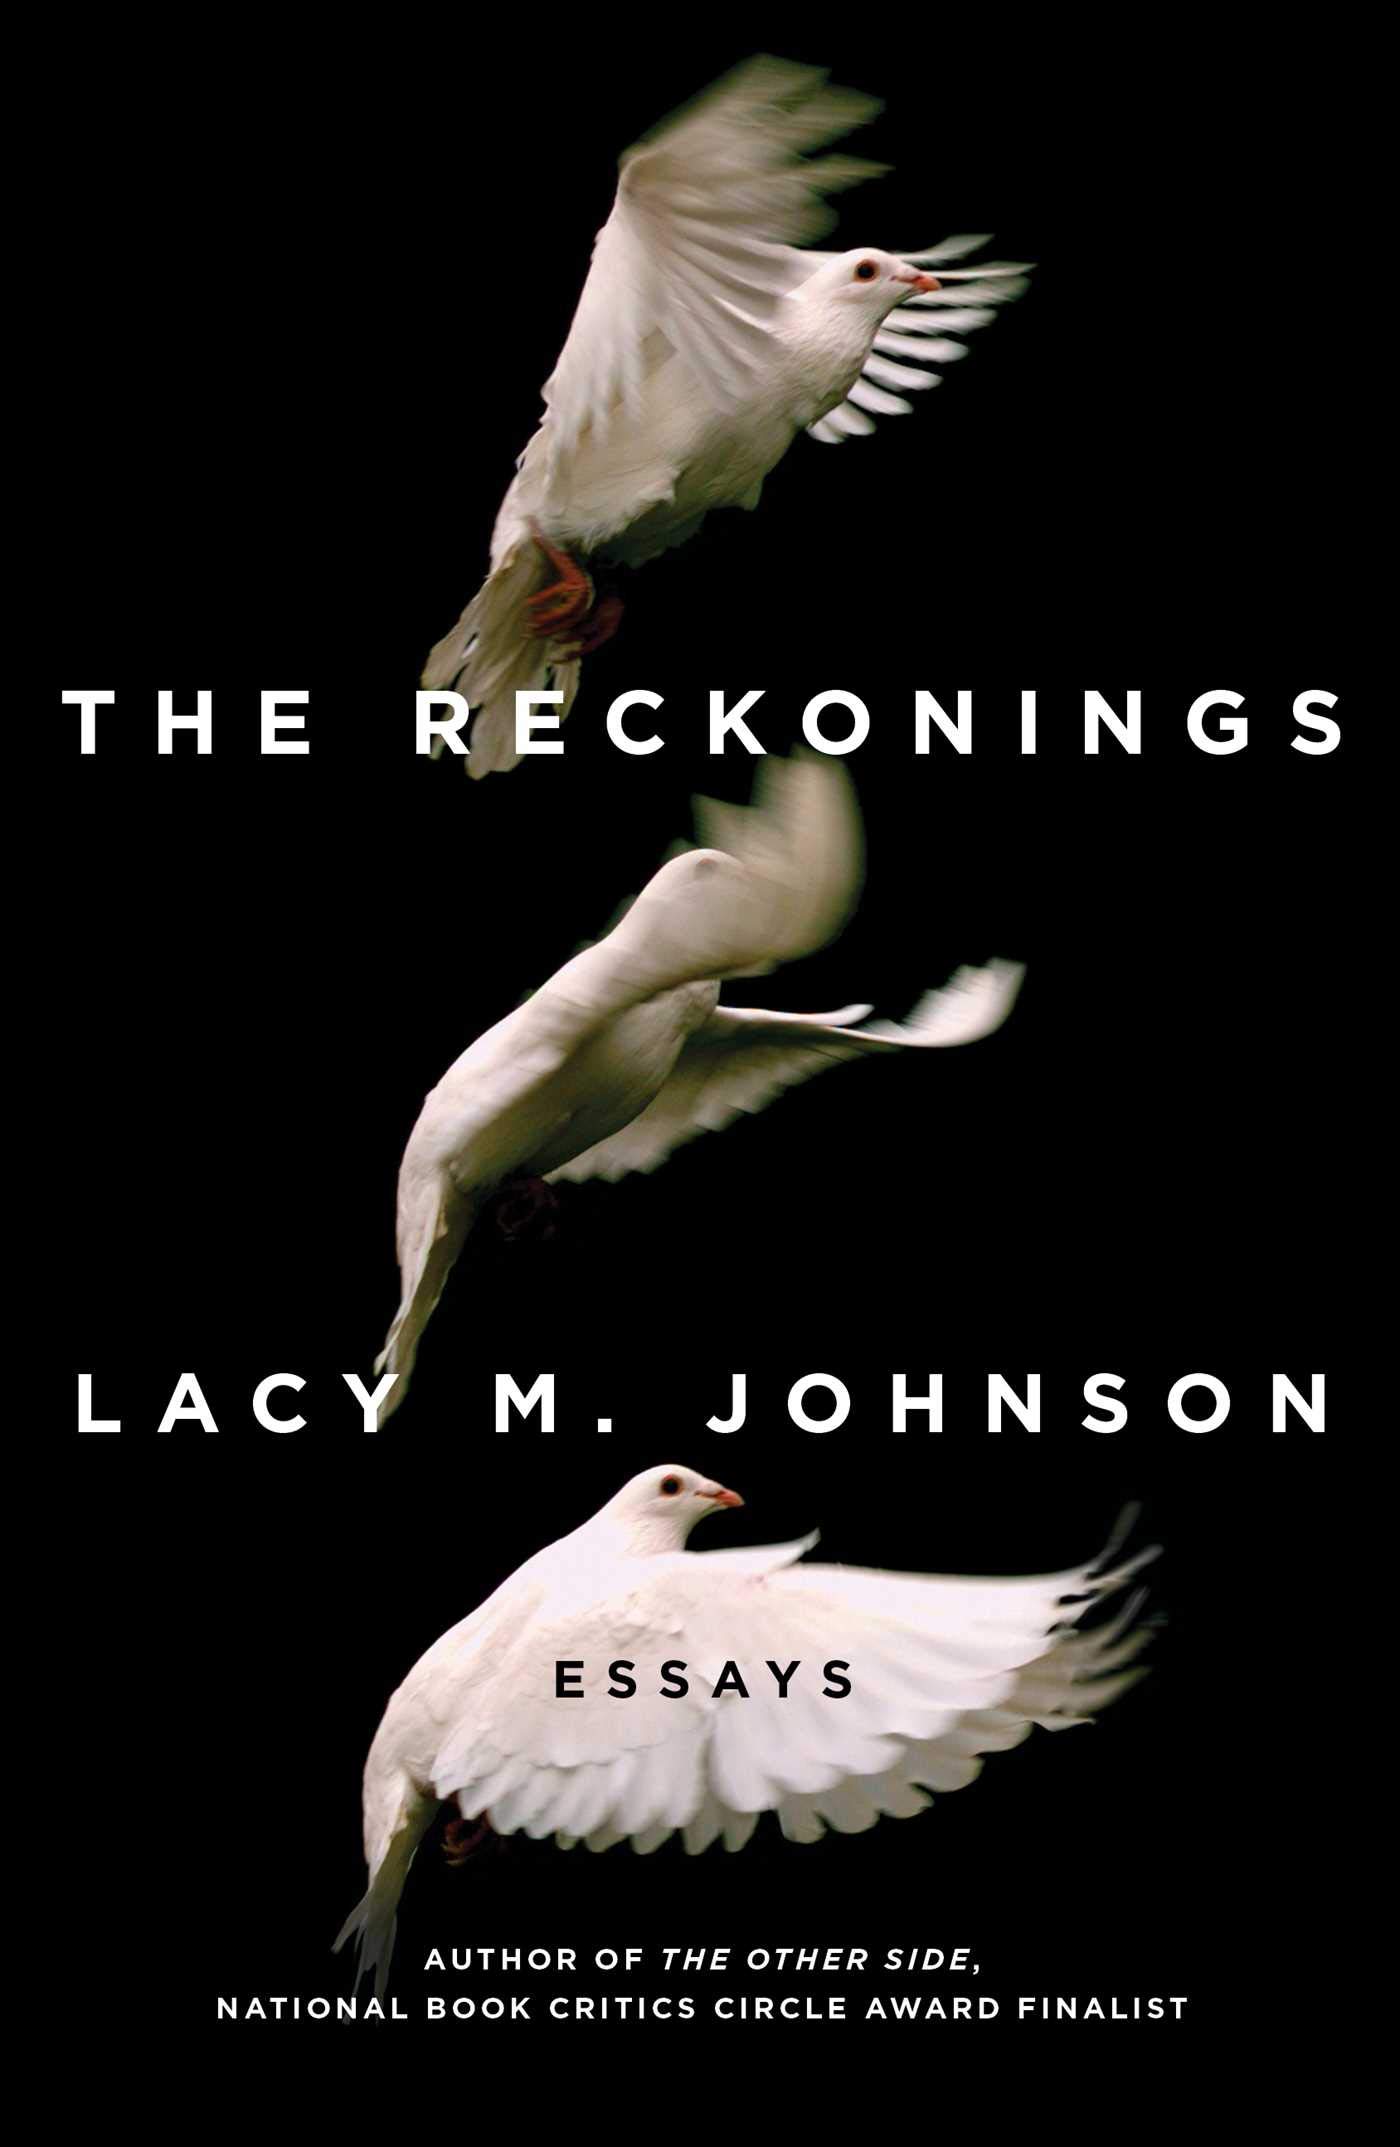 A book cover for The Reckonings